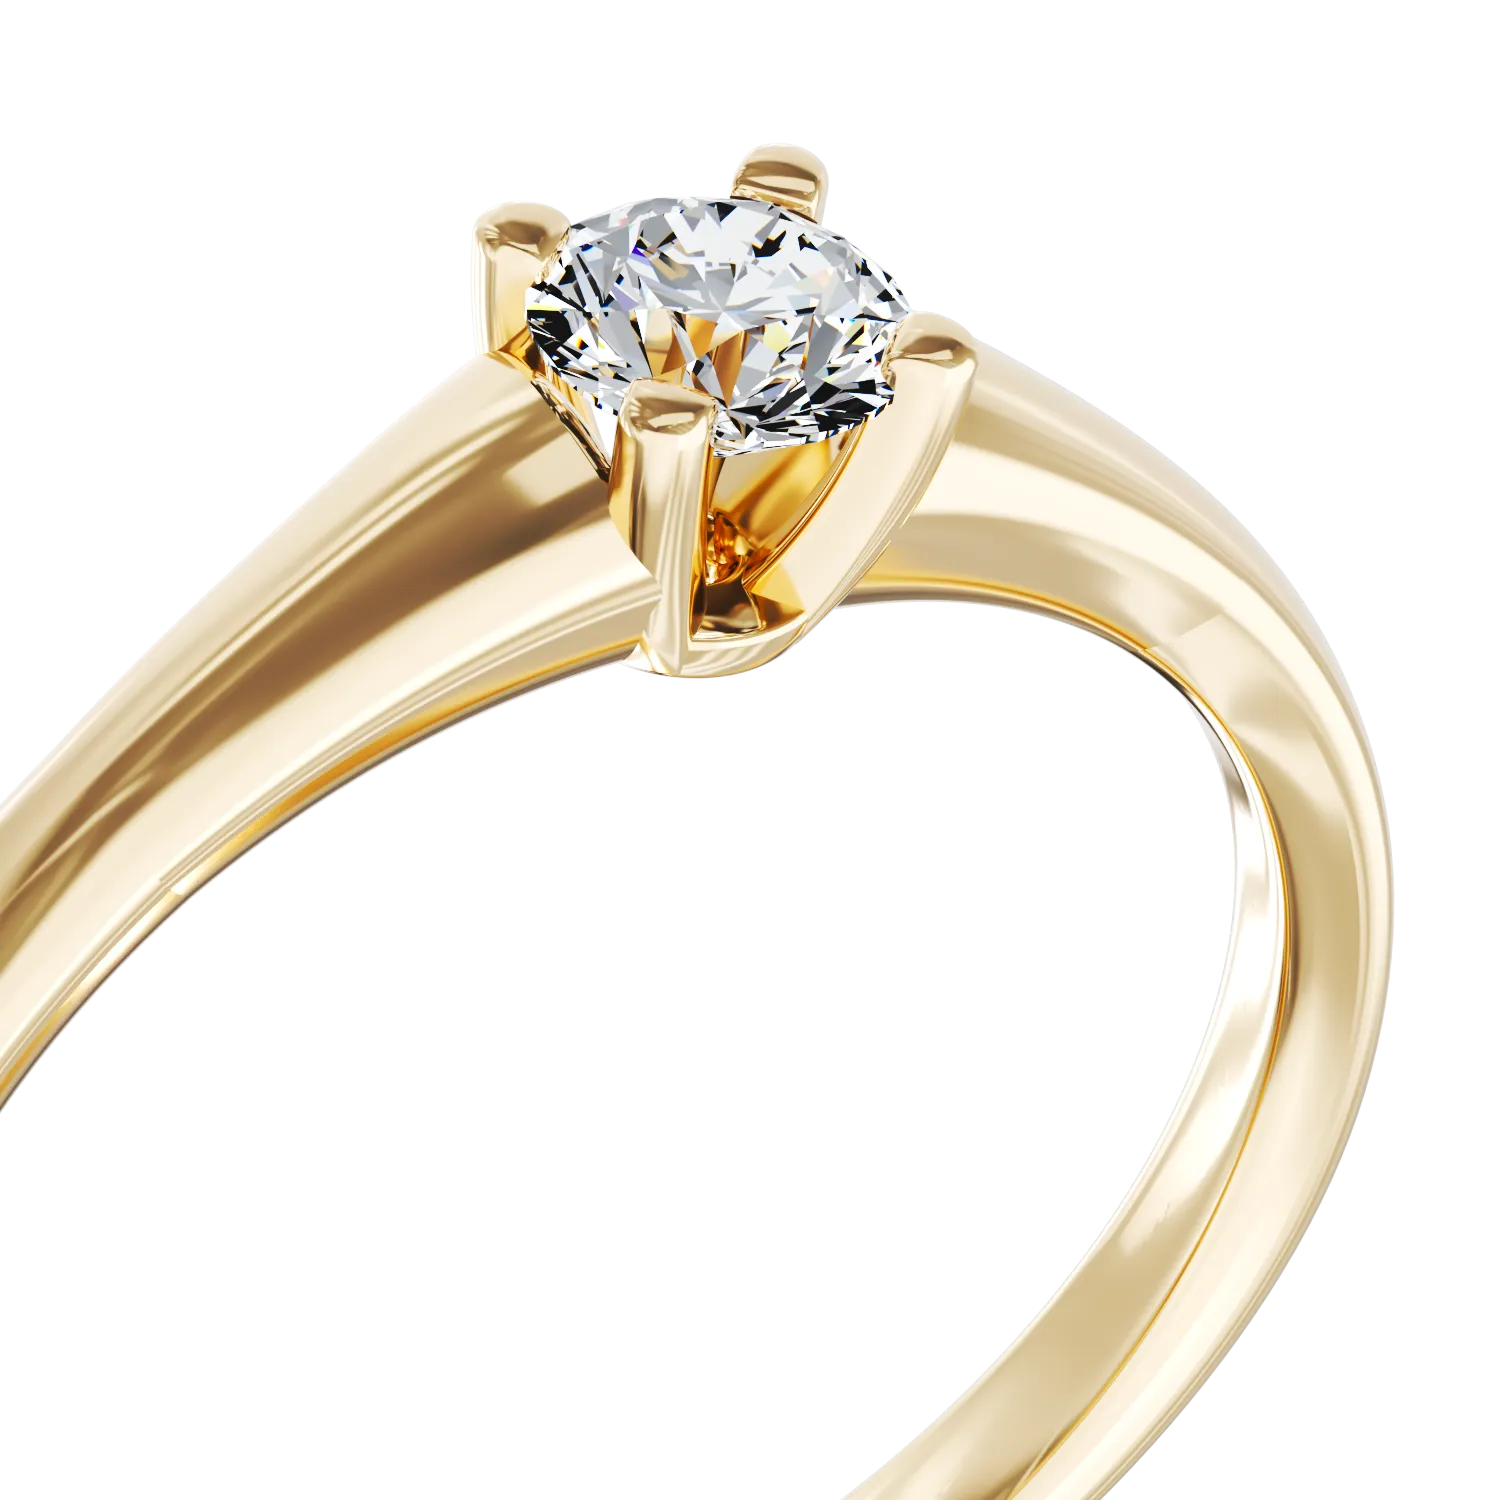 Yellow gold engagement ring with 0.2ct solitaire diamond